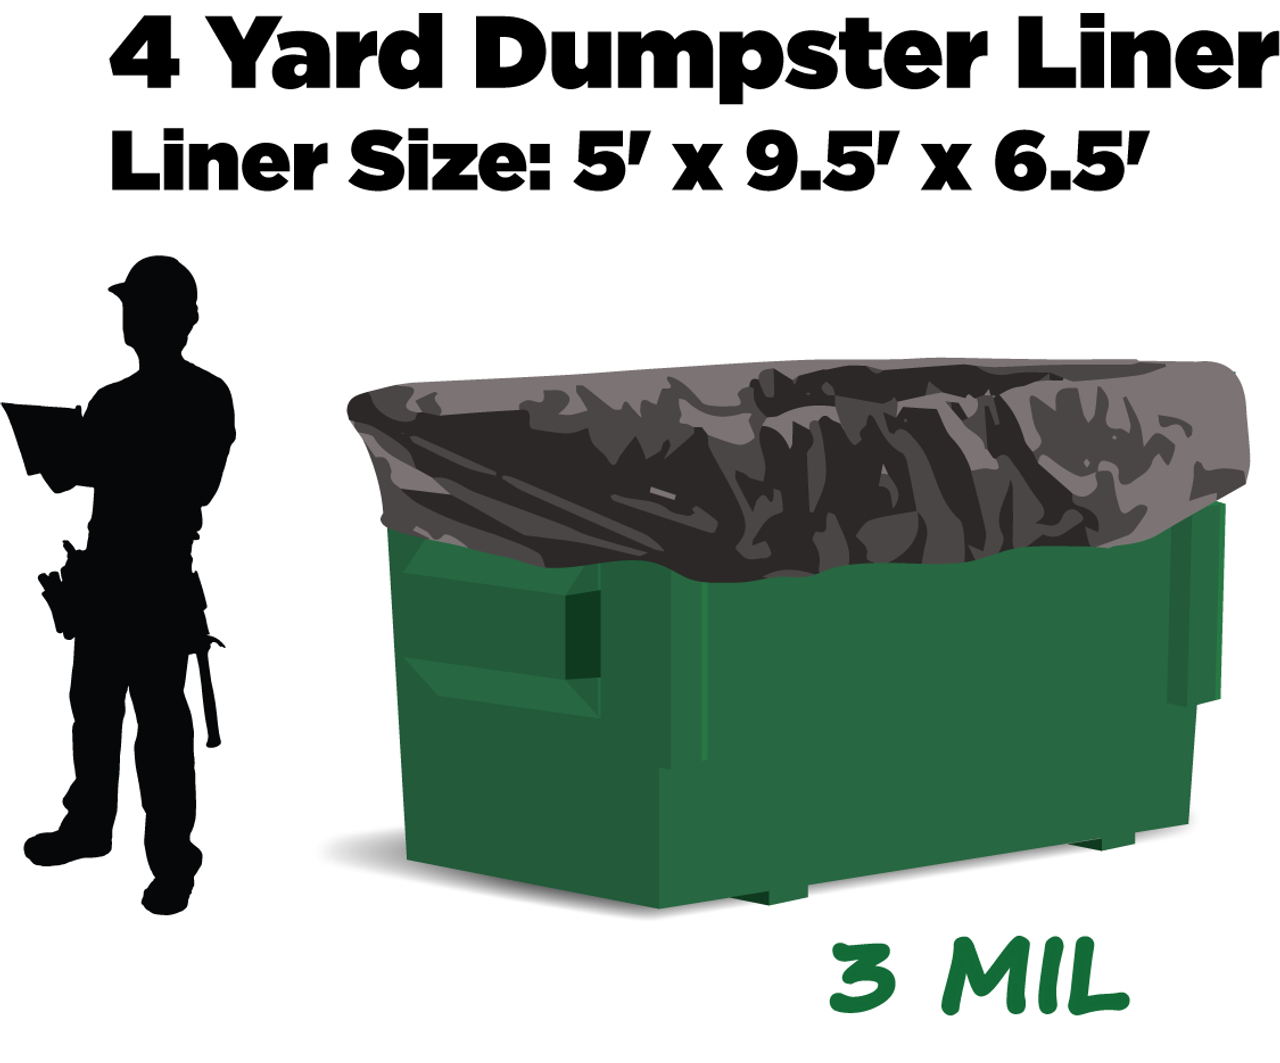 4 Yard Dumpster Liners - 3 Mil Thickness